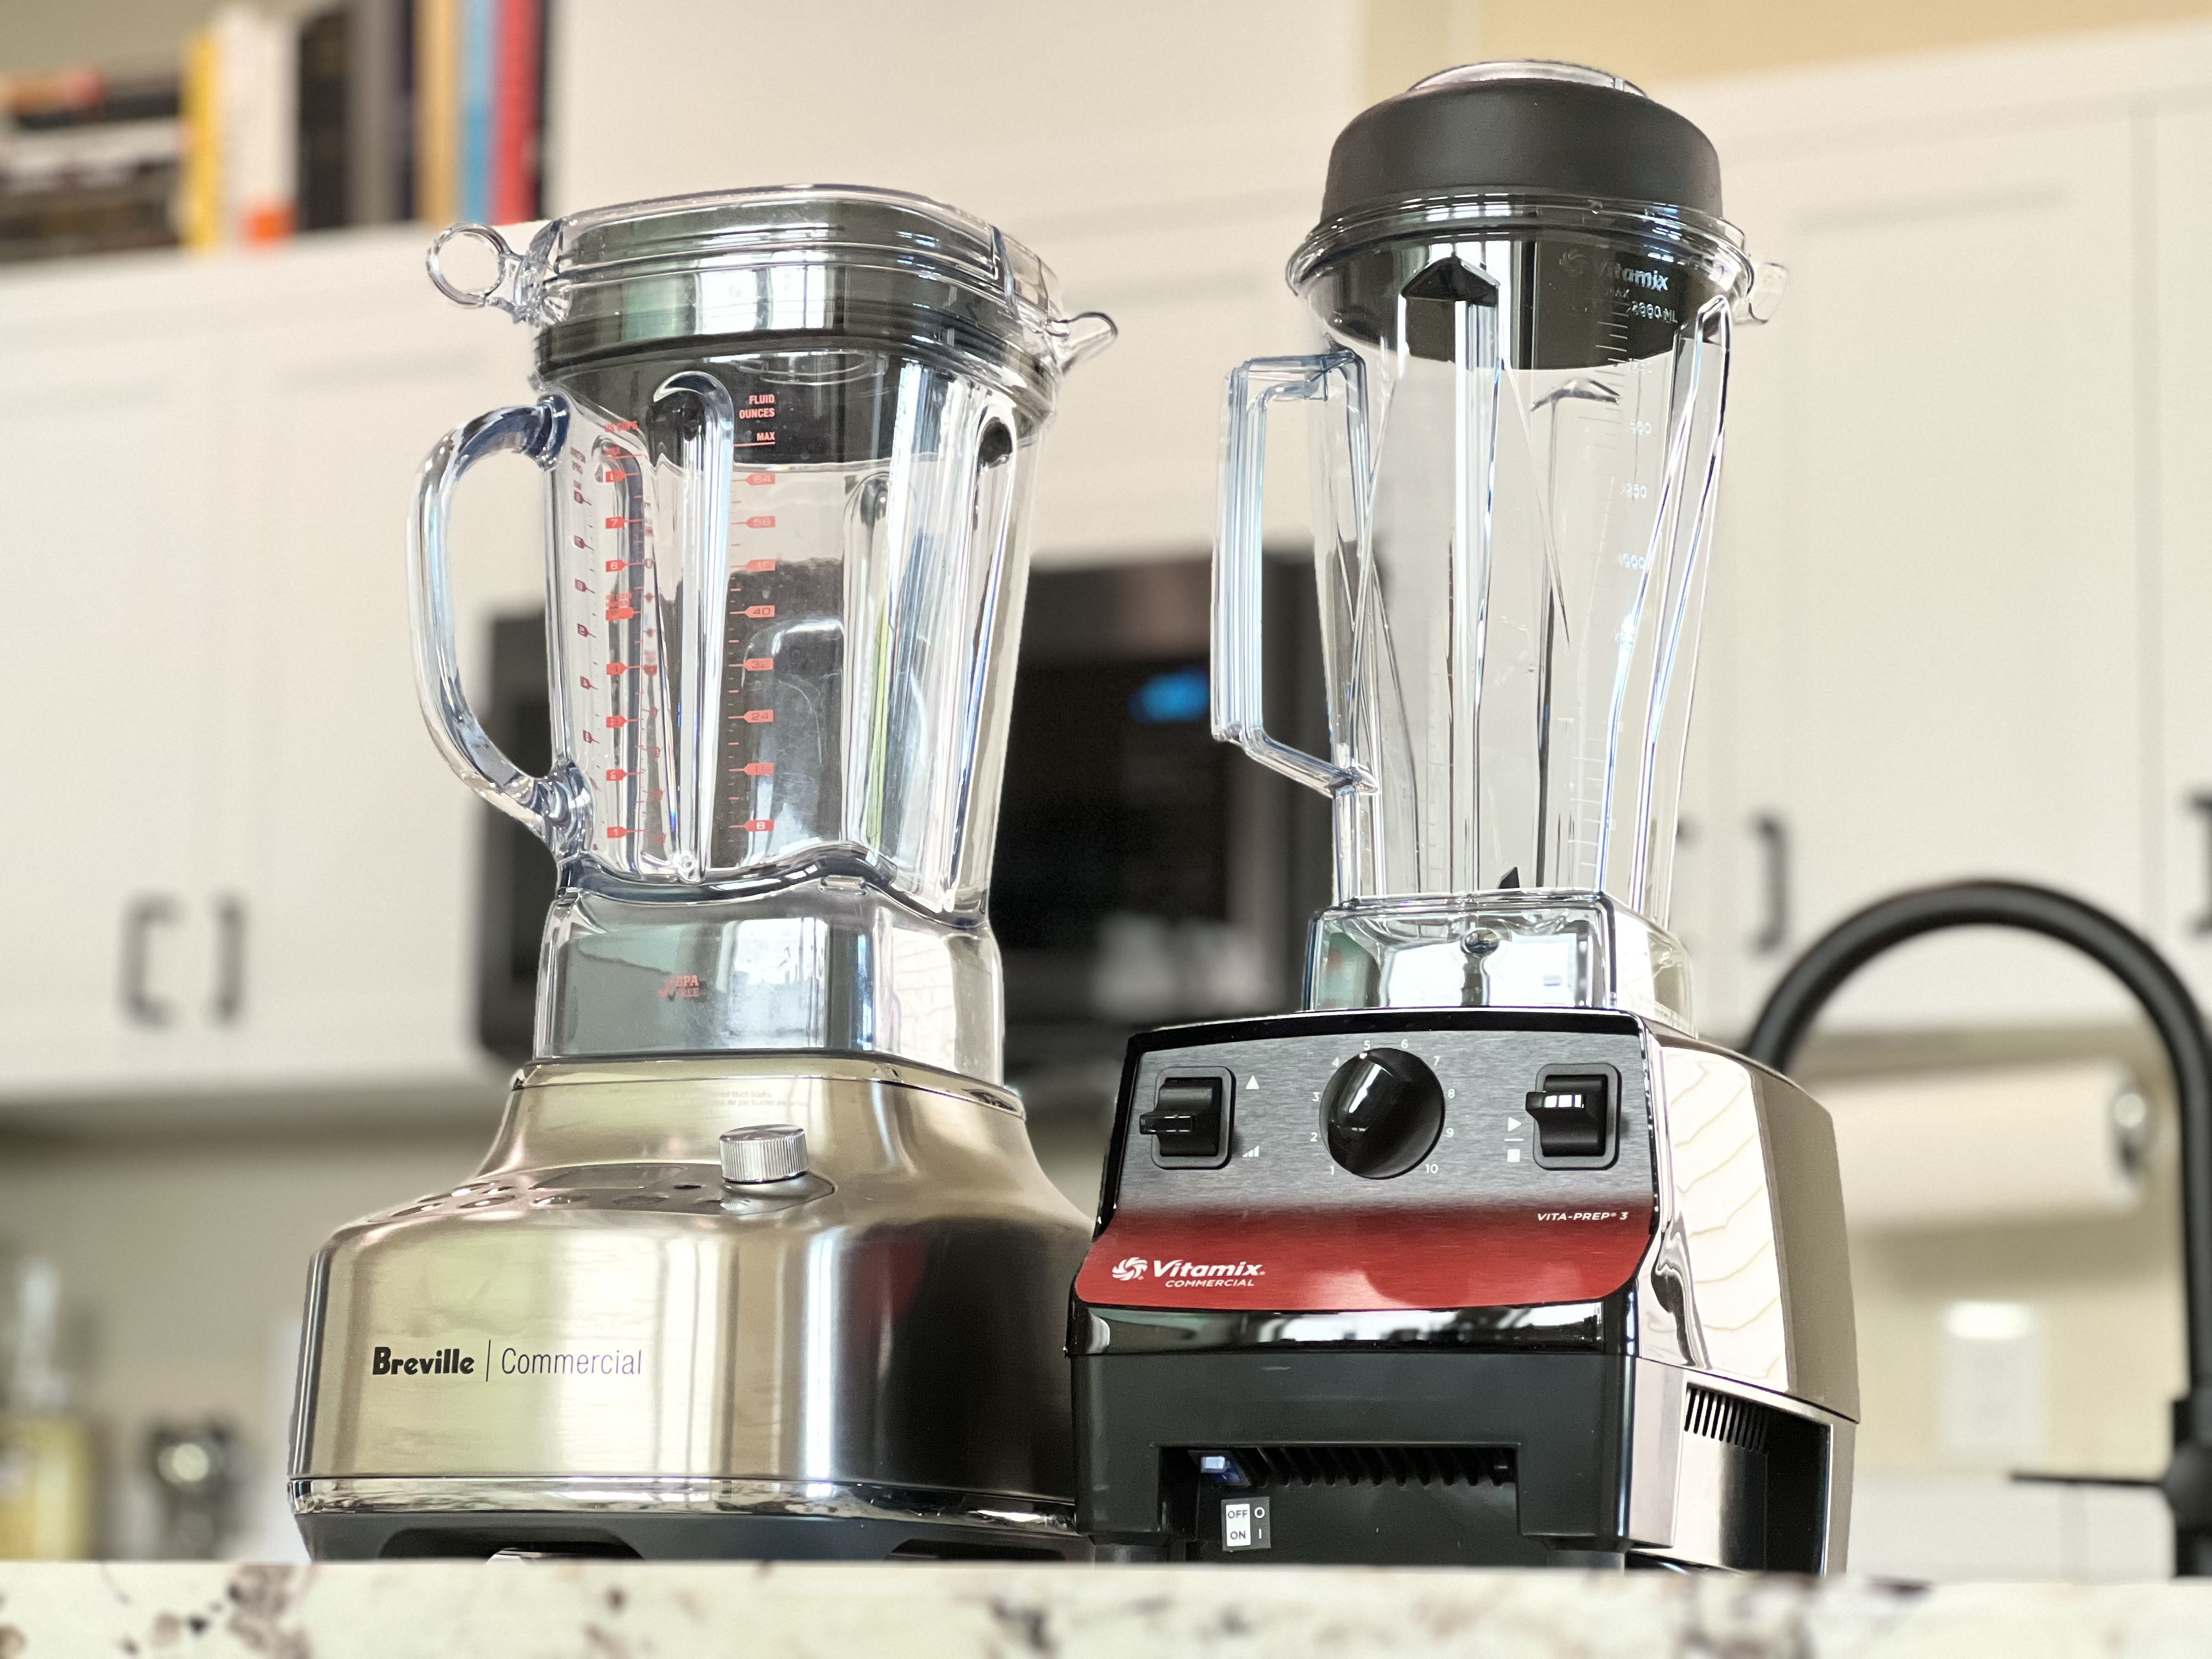 Vitamix One review: A lower-cost blender with a potentially